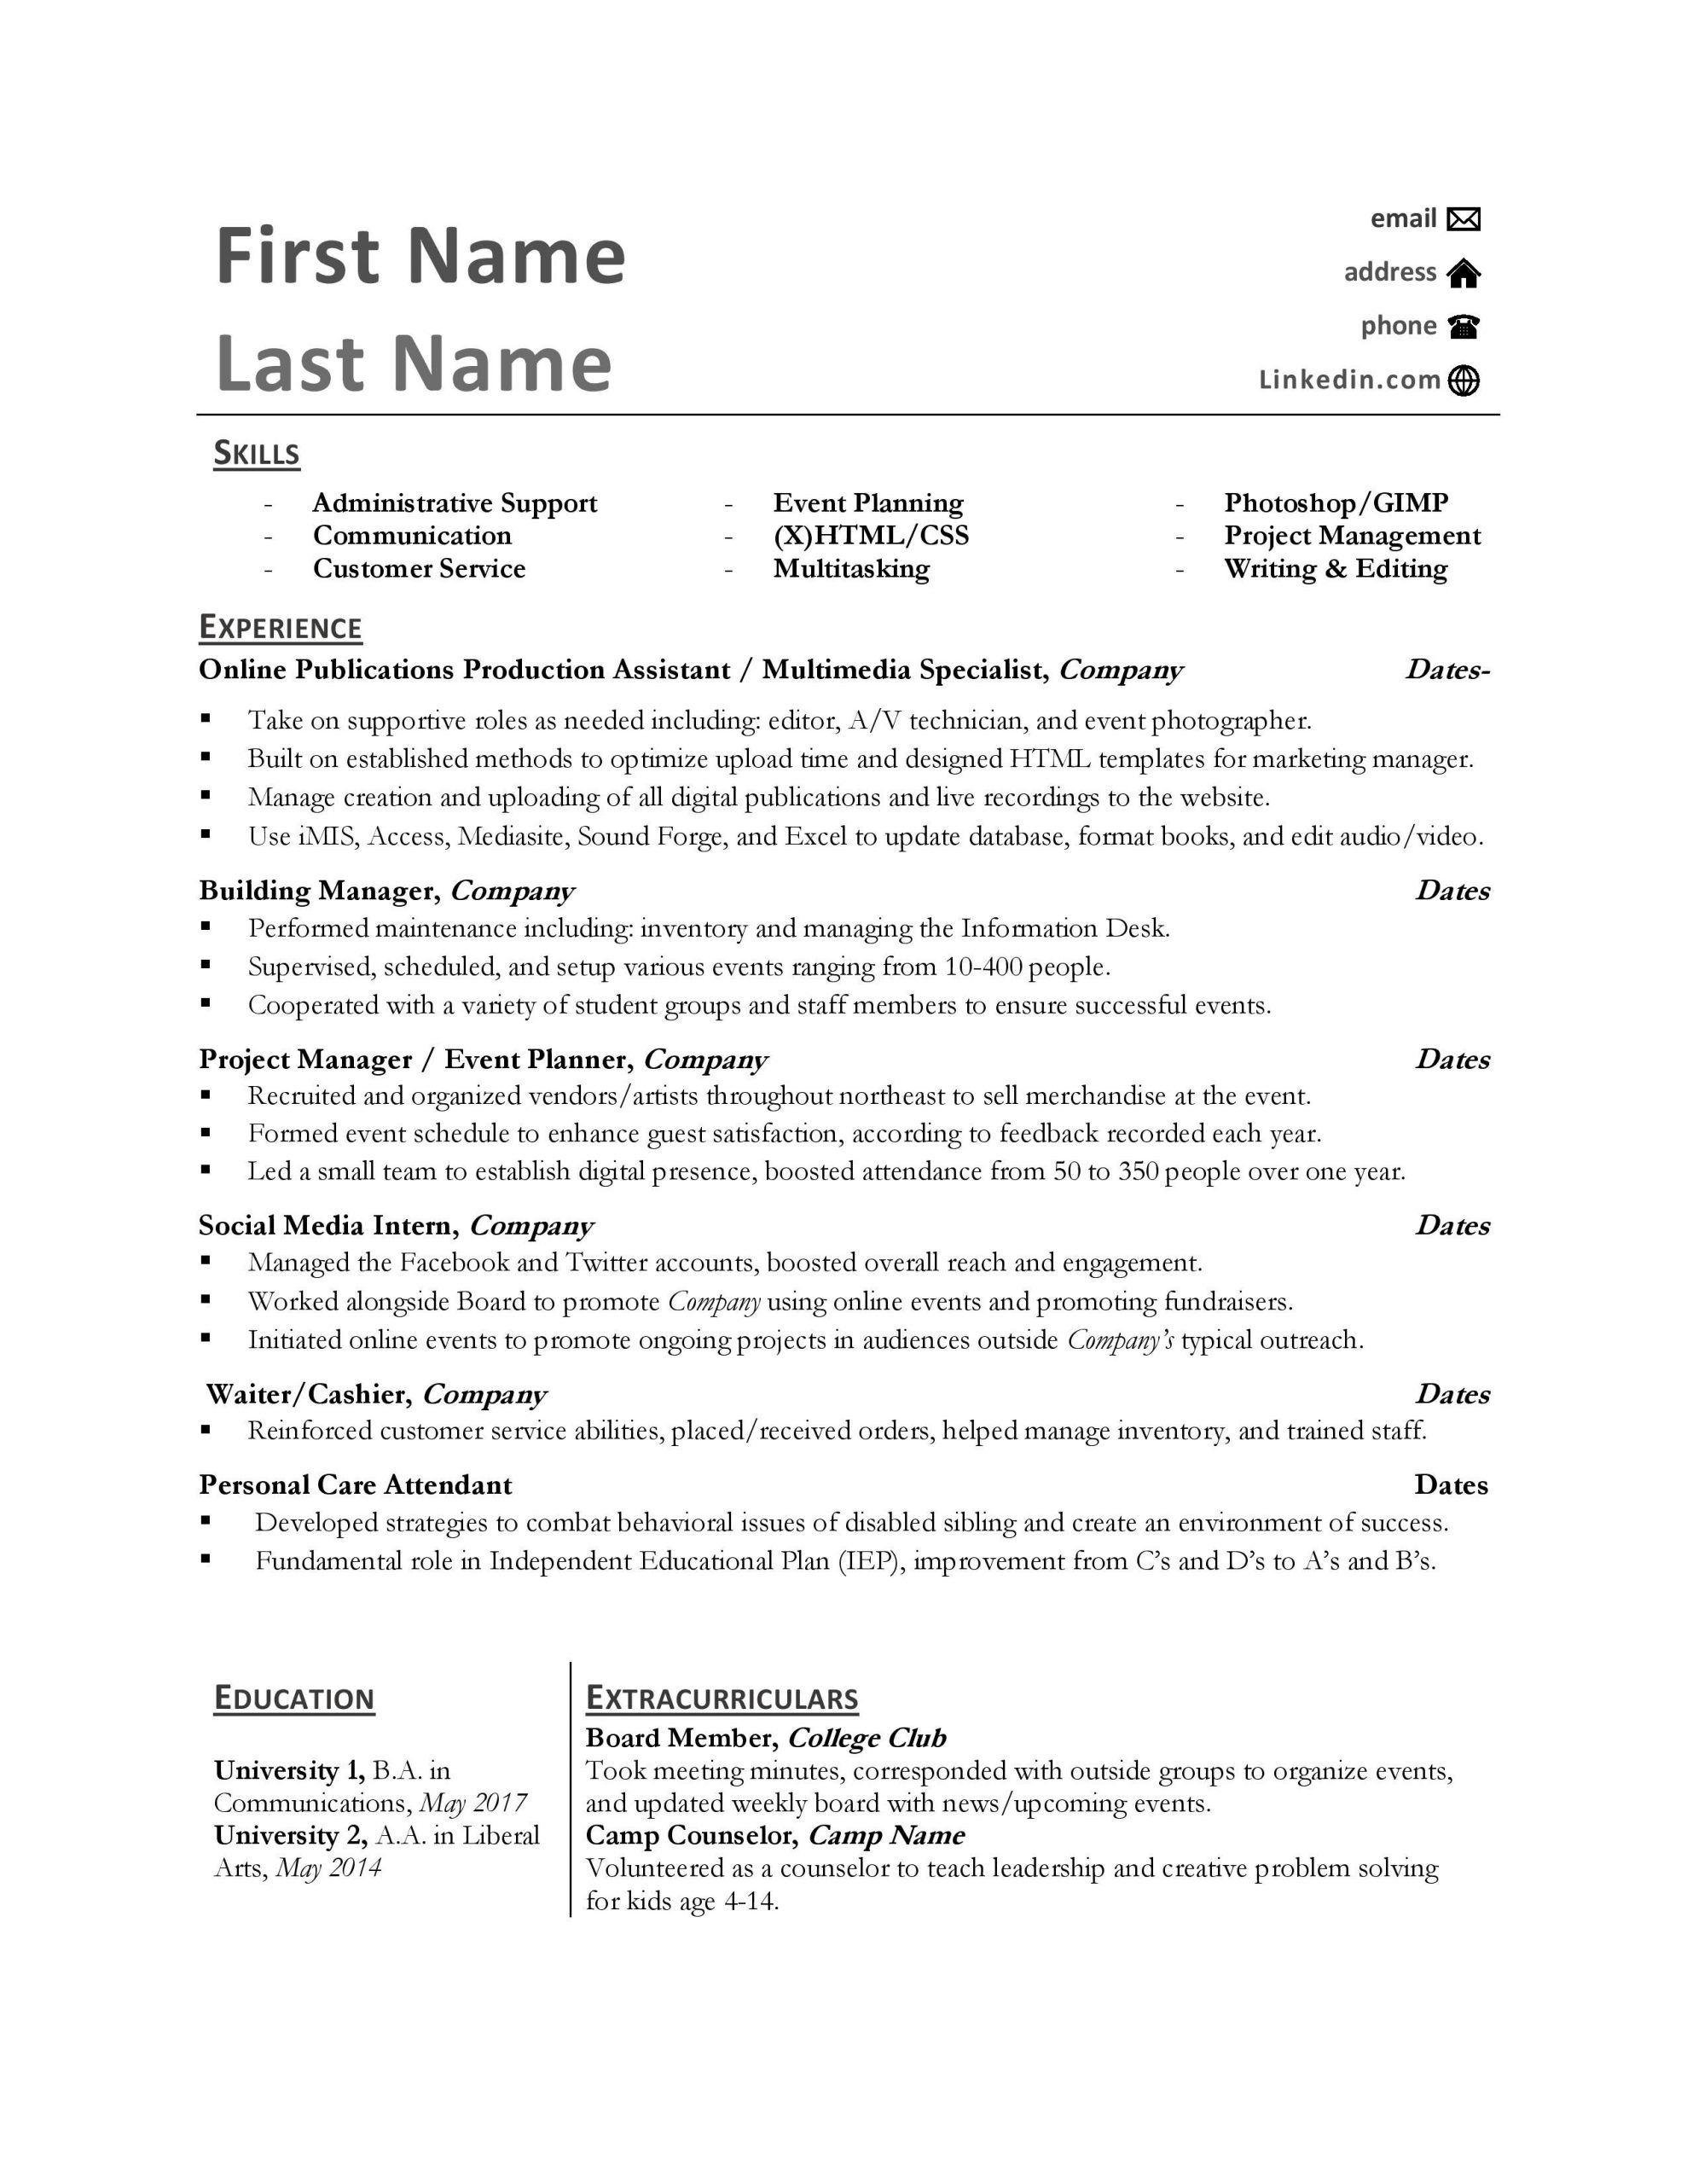 Sample Resume with Multiple Positions at Same Company Help A Recent Grad with An Awkward Resume. Also, Advice for Best …